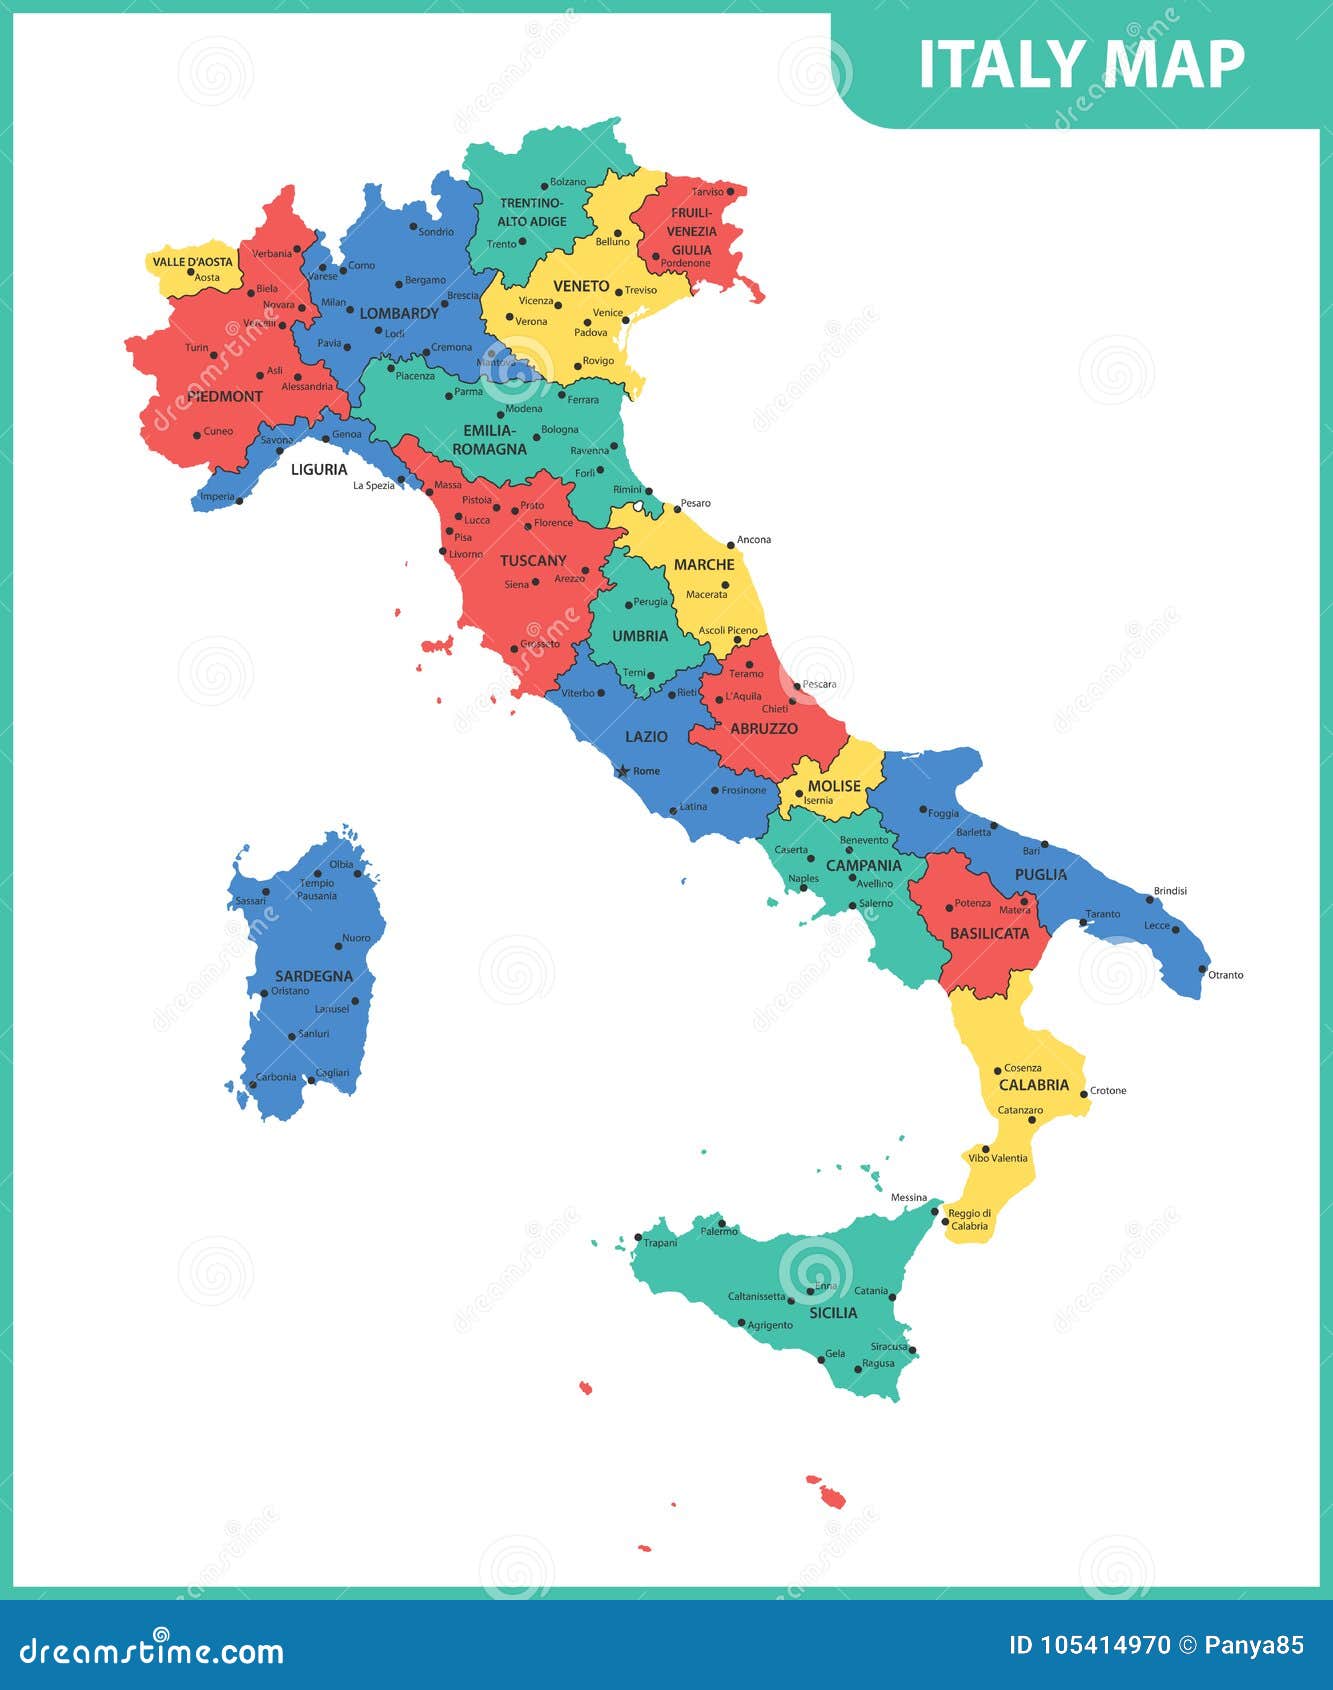 the detailed map of the italy with regions or states and cities, capital